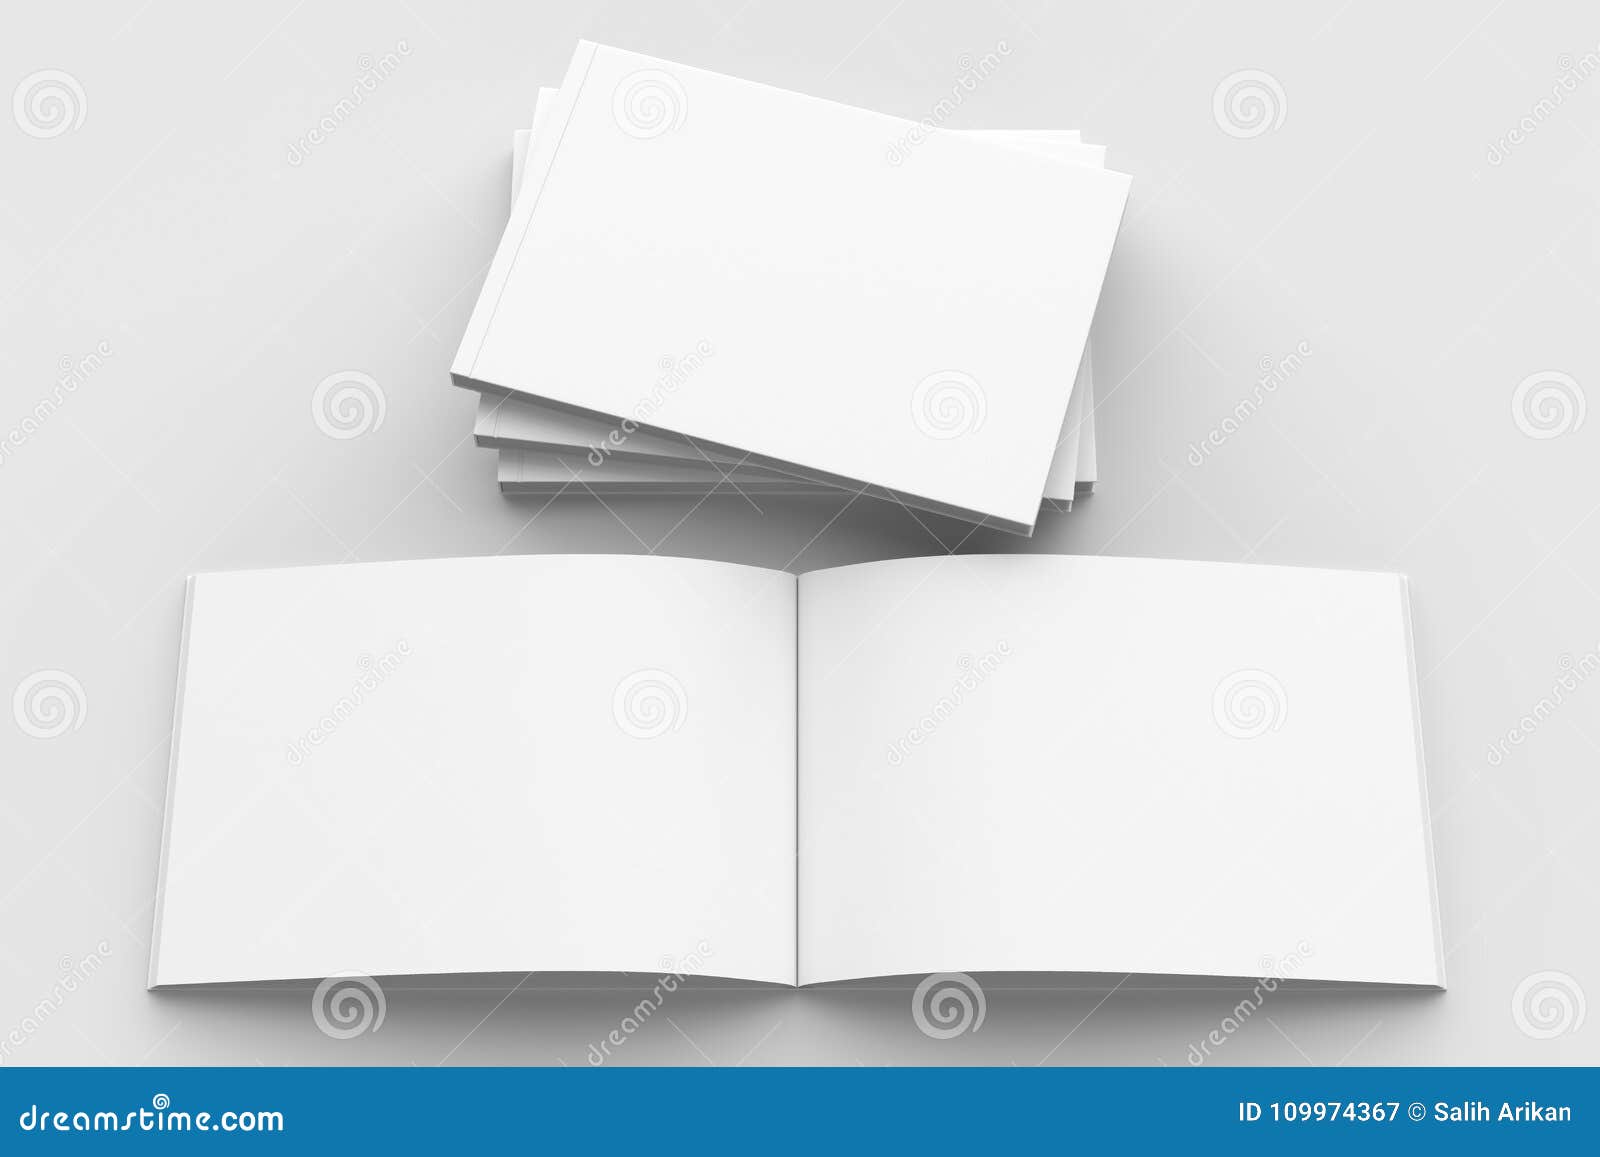 Empty book mockup. Opened 3d realistic booklet or brochure soft